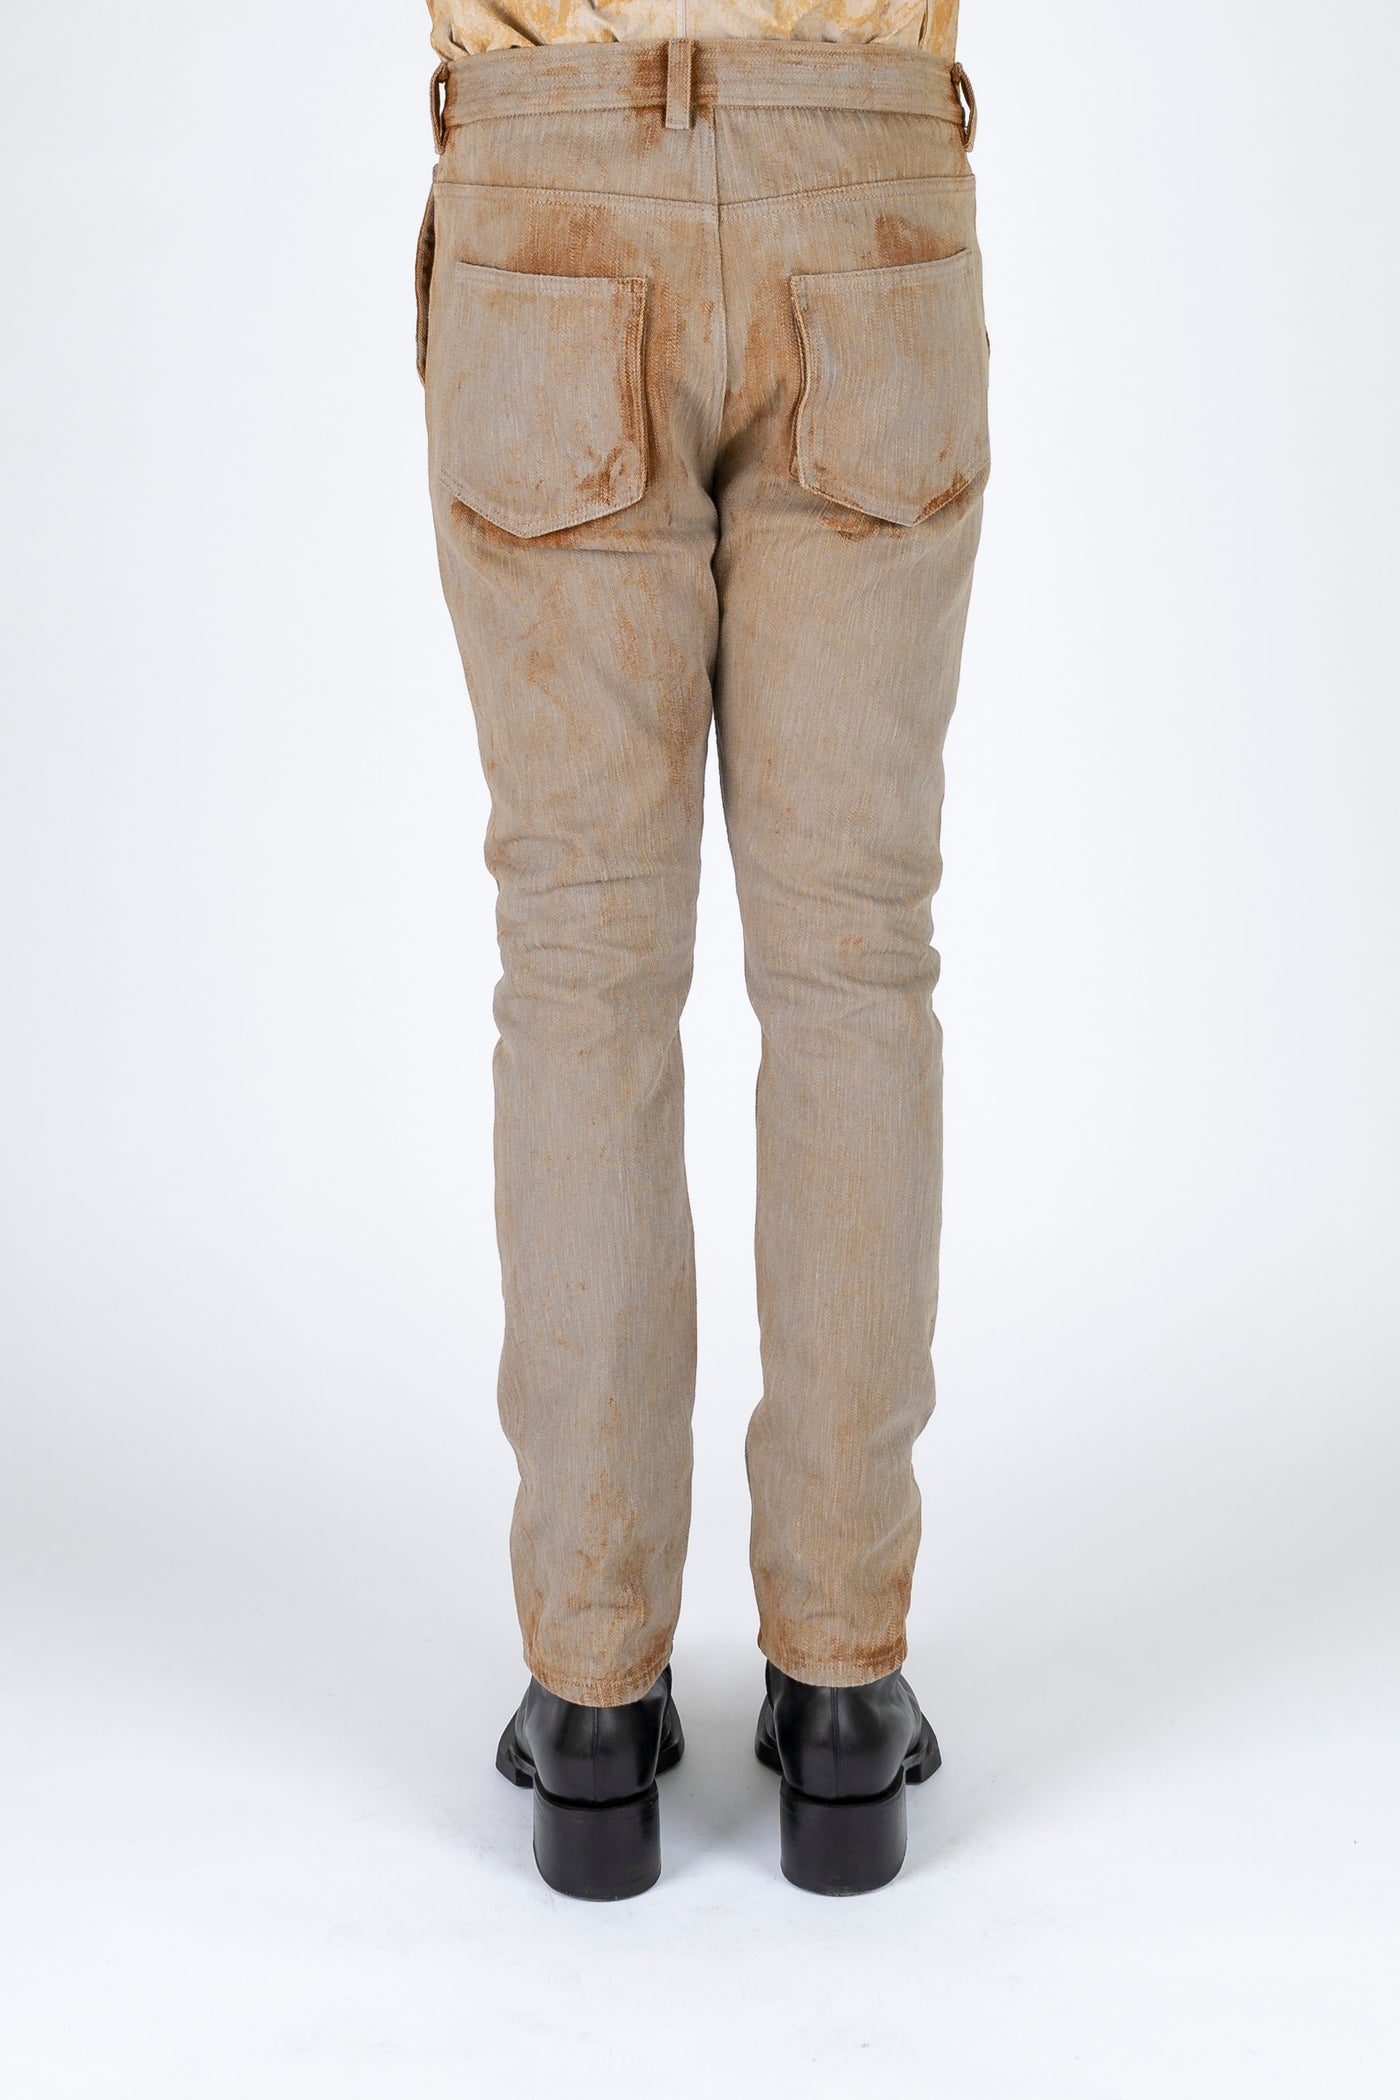 Formal Trousers  Irony Cream Cotton Trouser Retailer from Chennai